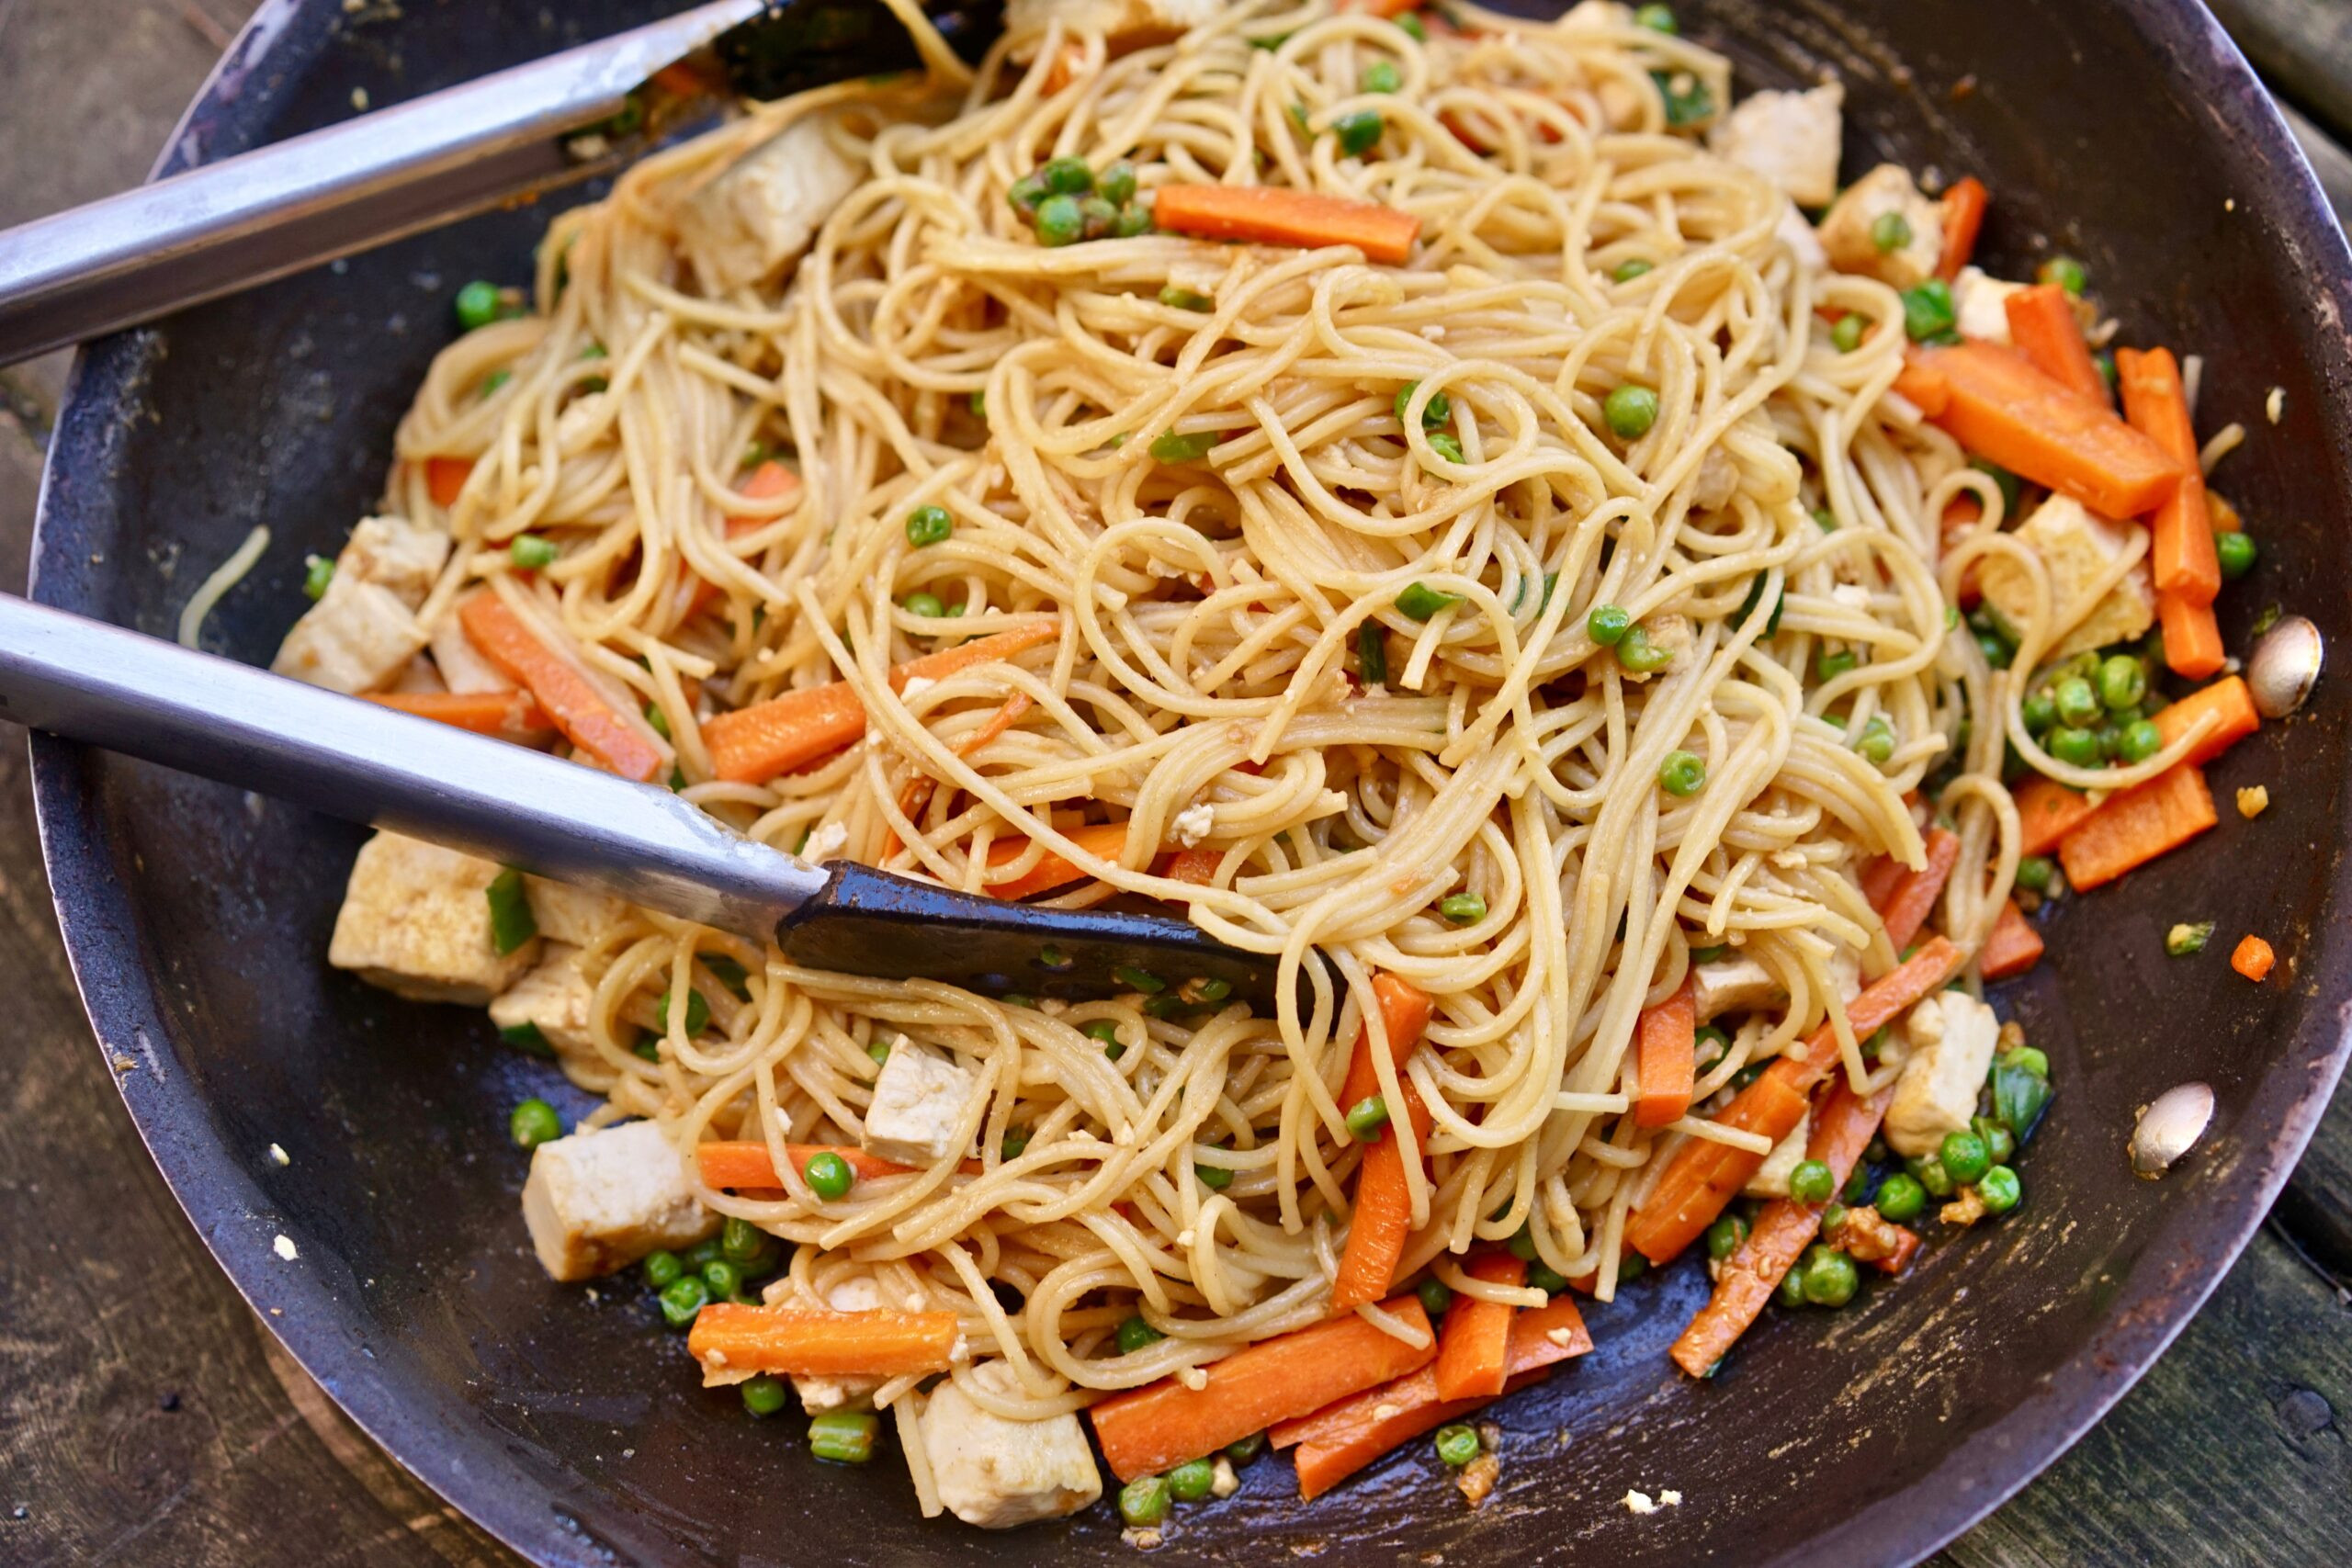 Peanut butter Noodles Recipe Awesome Scrumptious Peanut butter Noodles that You Re Going to Love